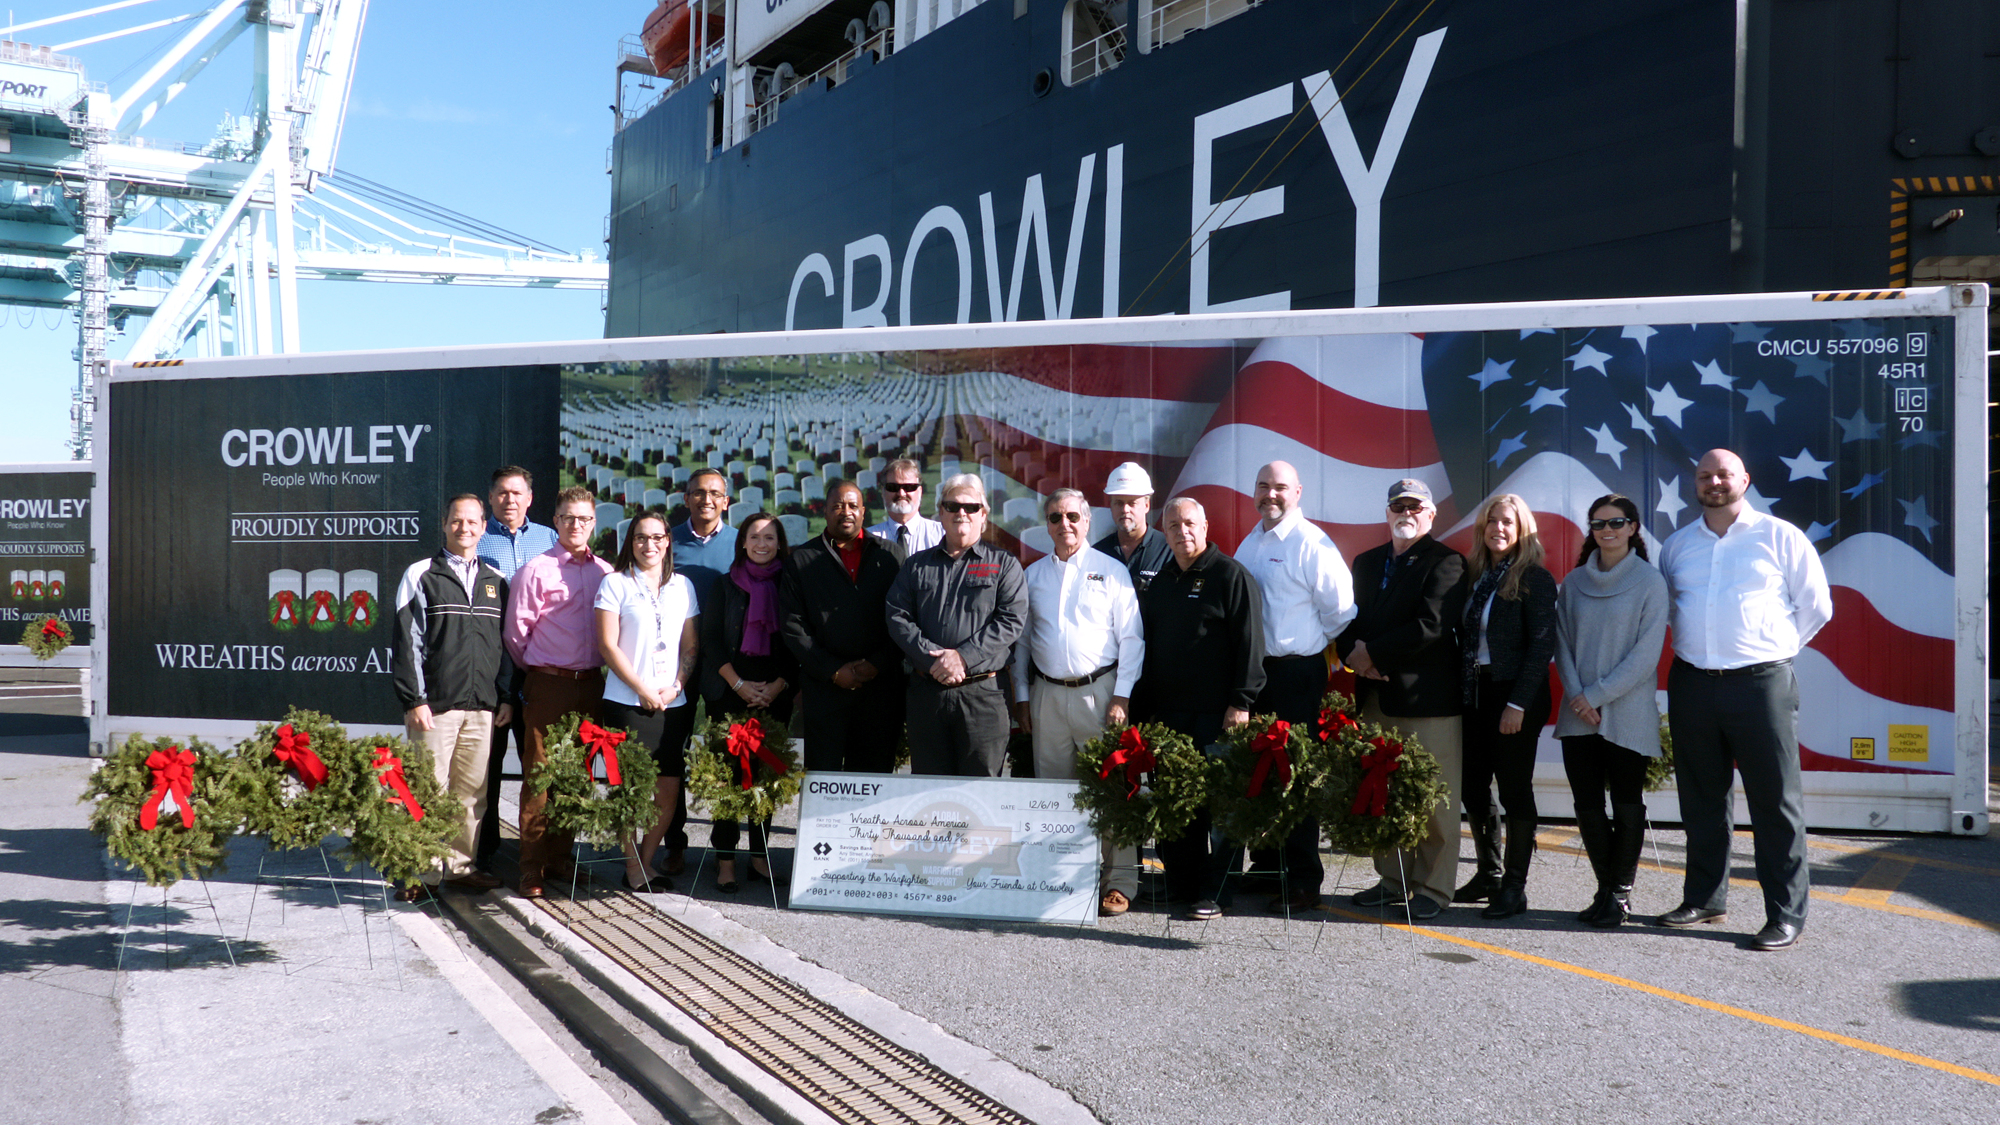 Crowley is donating $17,000 in logistics services and $30,000 to the Wreaths Across America organization.